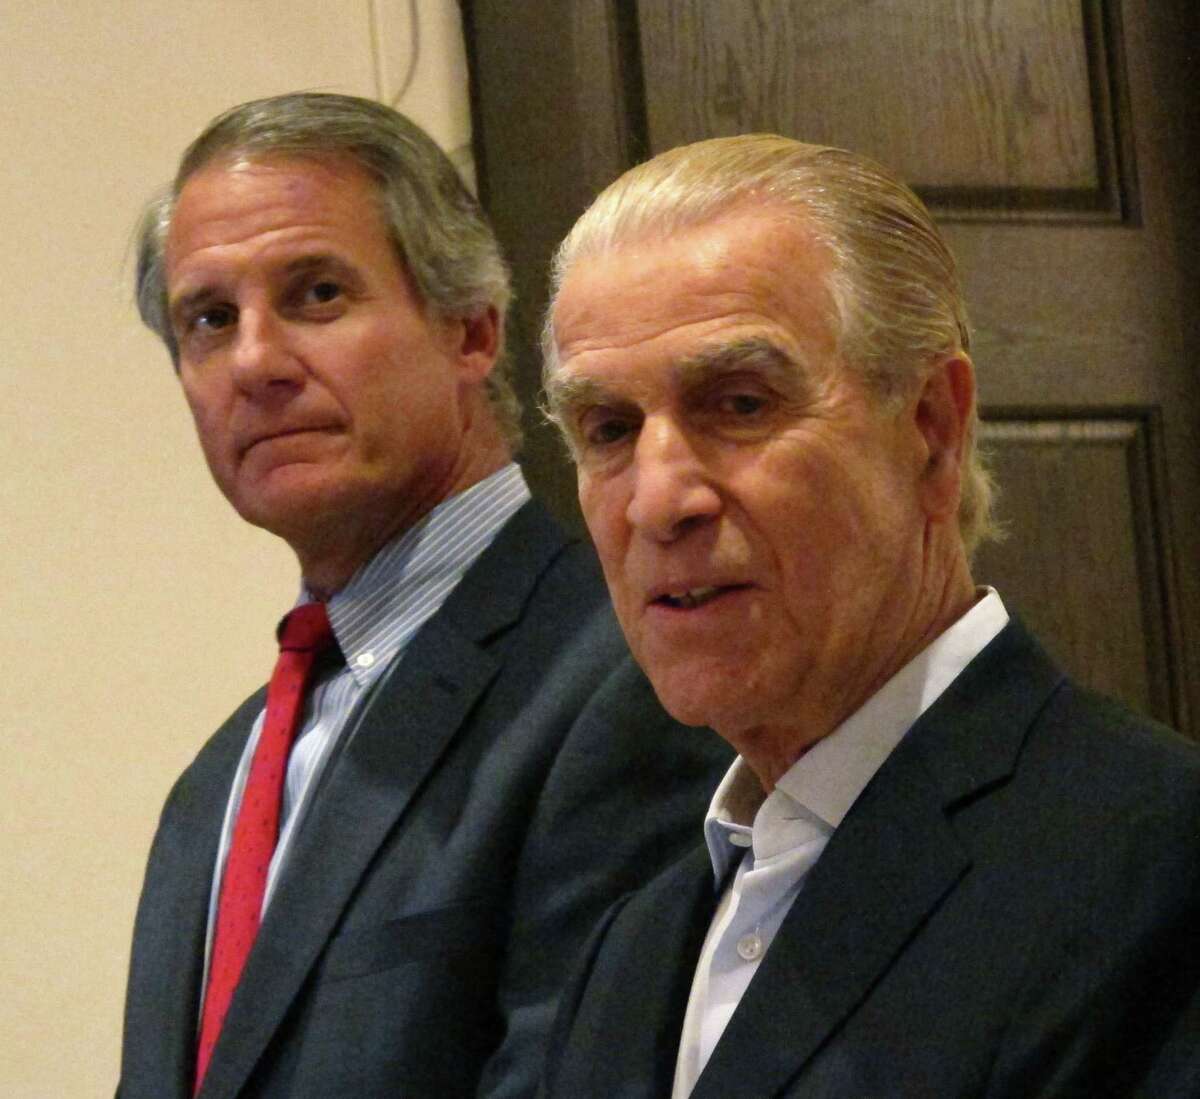 This Aug. 26, 2015, photo shows Mitchell Etess, right, CEO of Mohegan Gaming Advisors, and Morris Bailey, left, owner of Resorts Casino Hotel in Atlantic City, N.J. On Wednesday Oct. 14, 2015, the New Jersey Casino Control Commission approved a new management agreement in which the Mohegans can invest in Resorts’ Internet gambling operations, but not own any more than 10 percent of the casino itself.